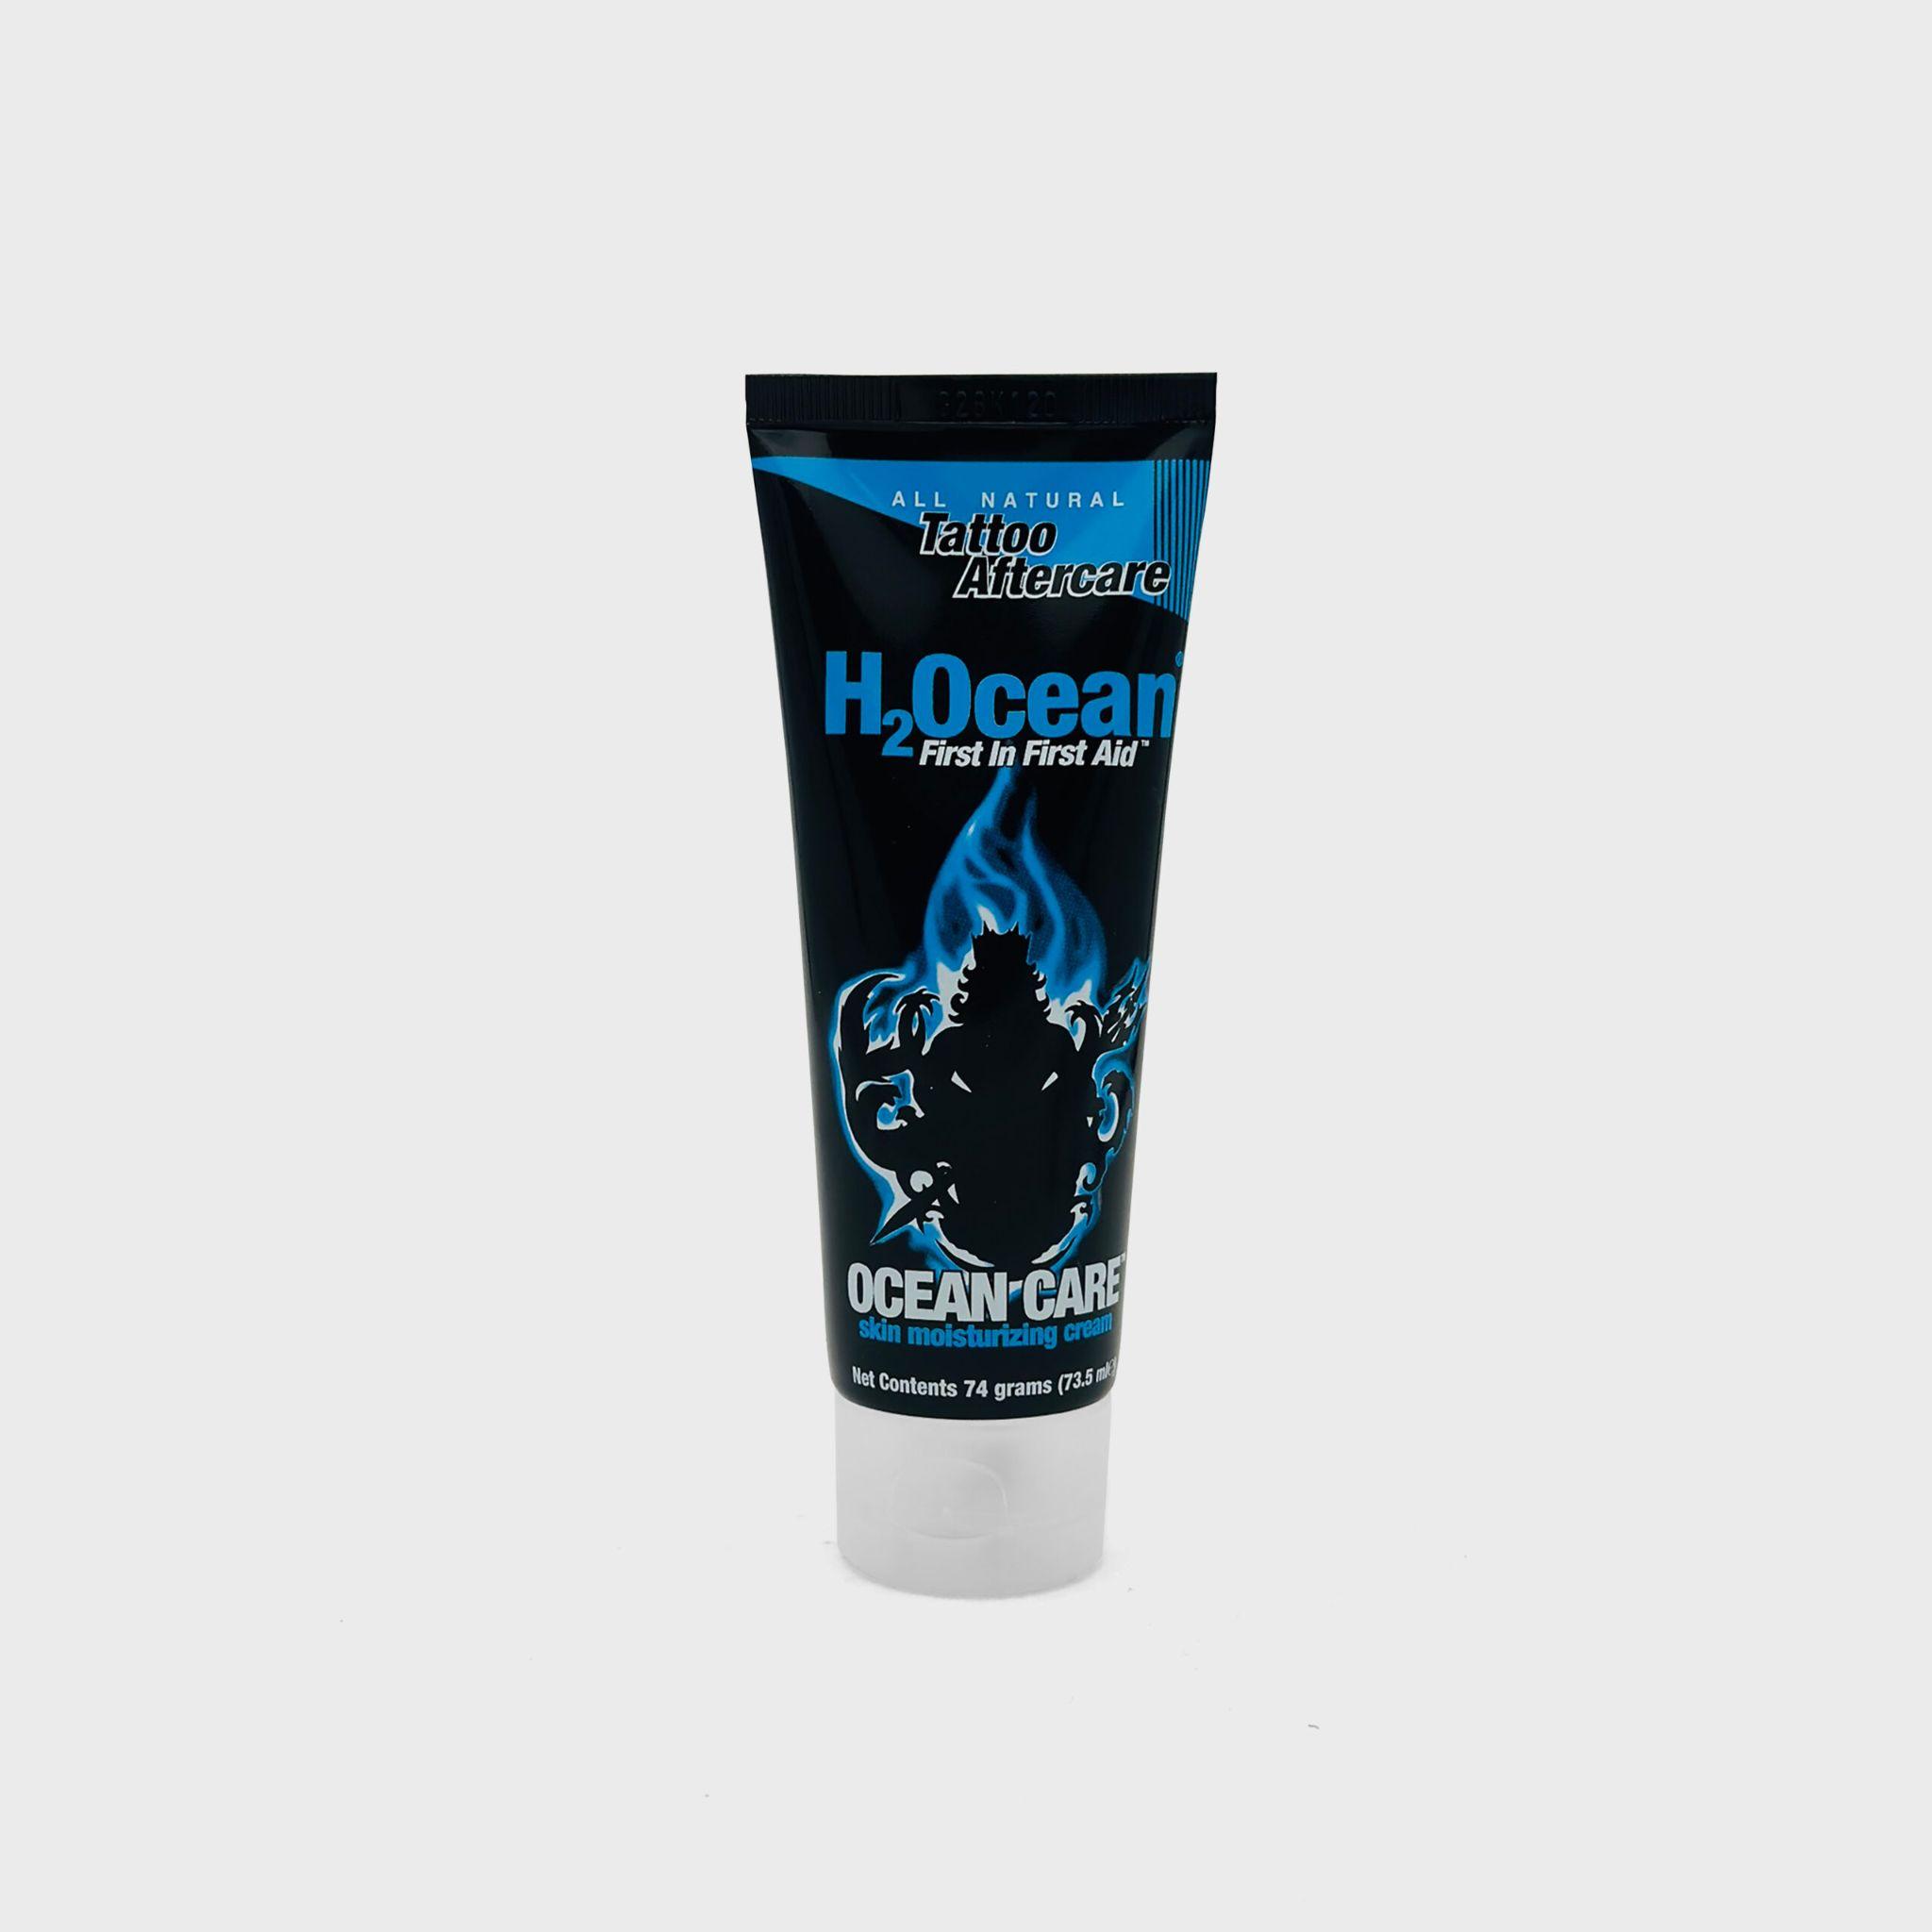 Ocean Care Tattoo Aftercare Lotion